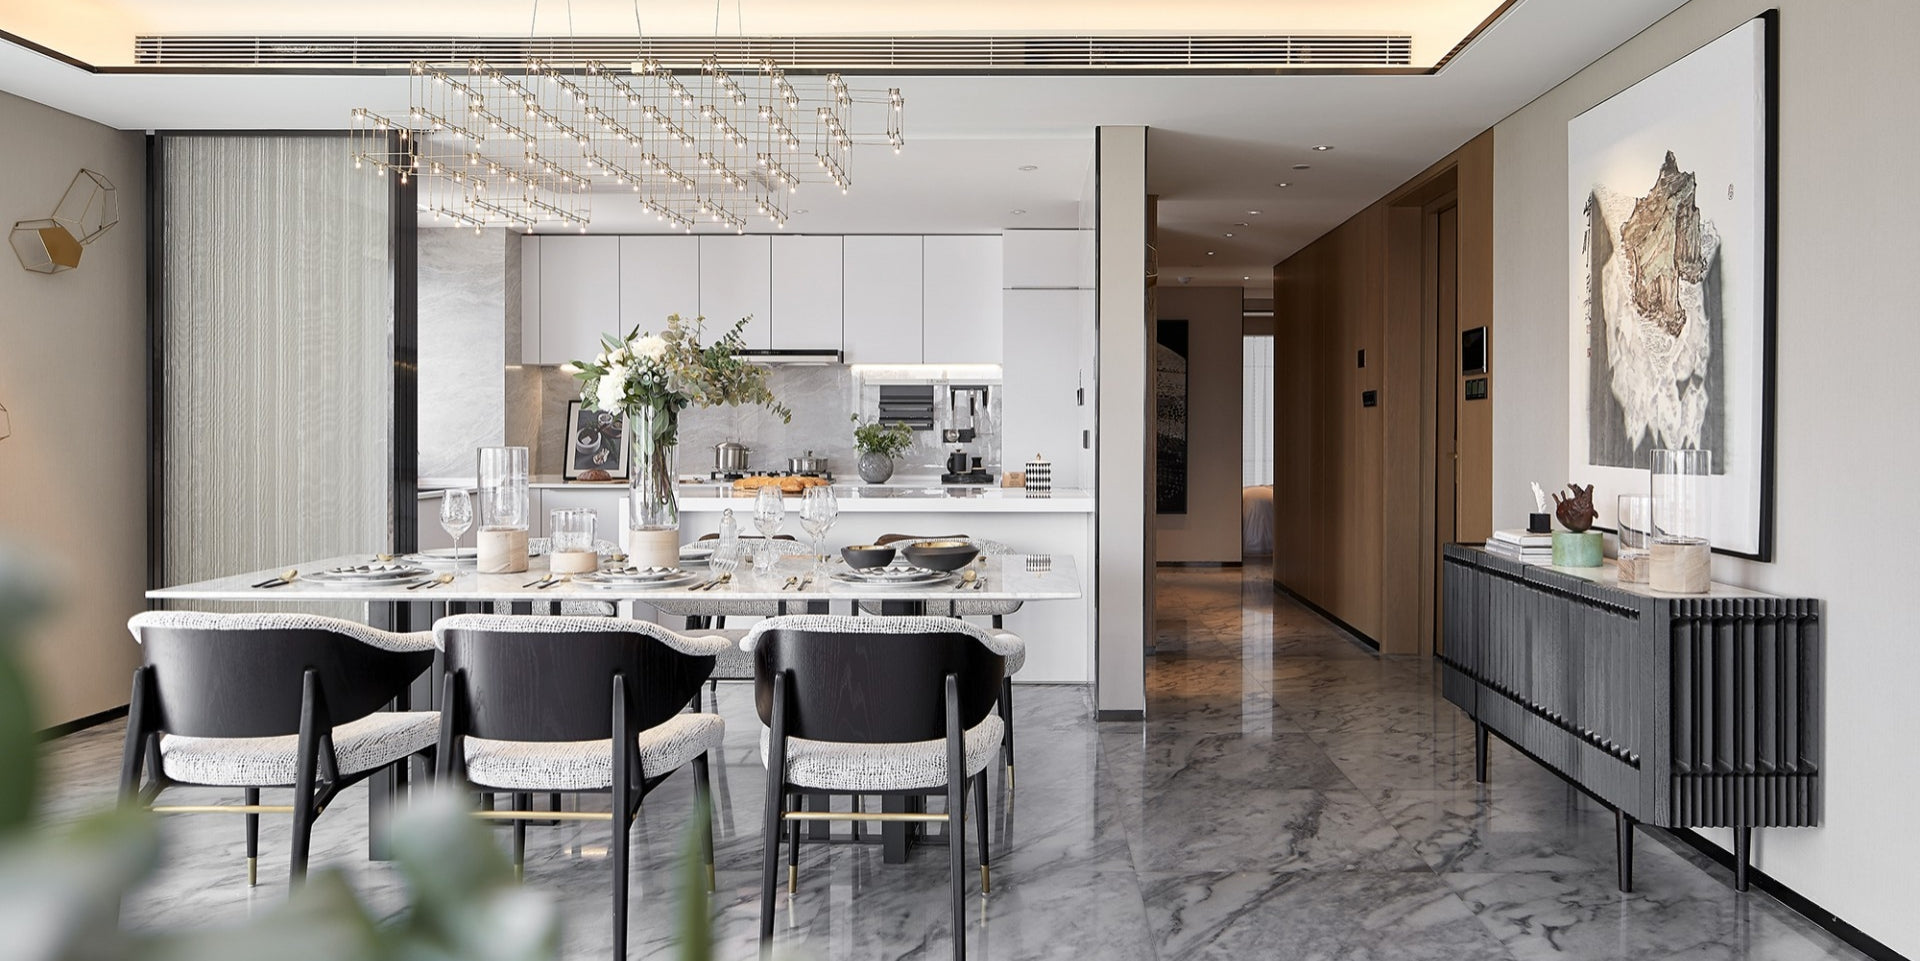 UPGRADE YOUR KITCHEN DESIGNS WITH THE MOST STUNNING IDEAS